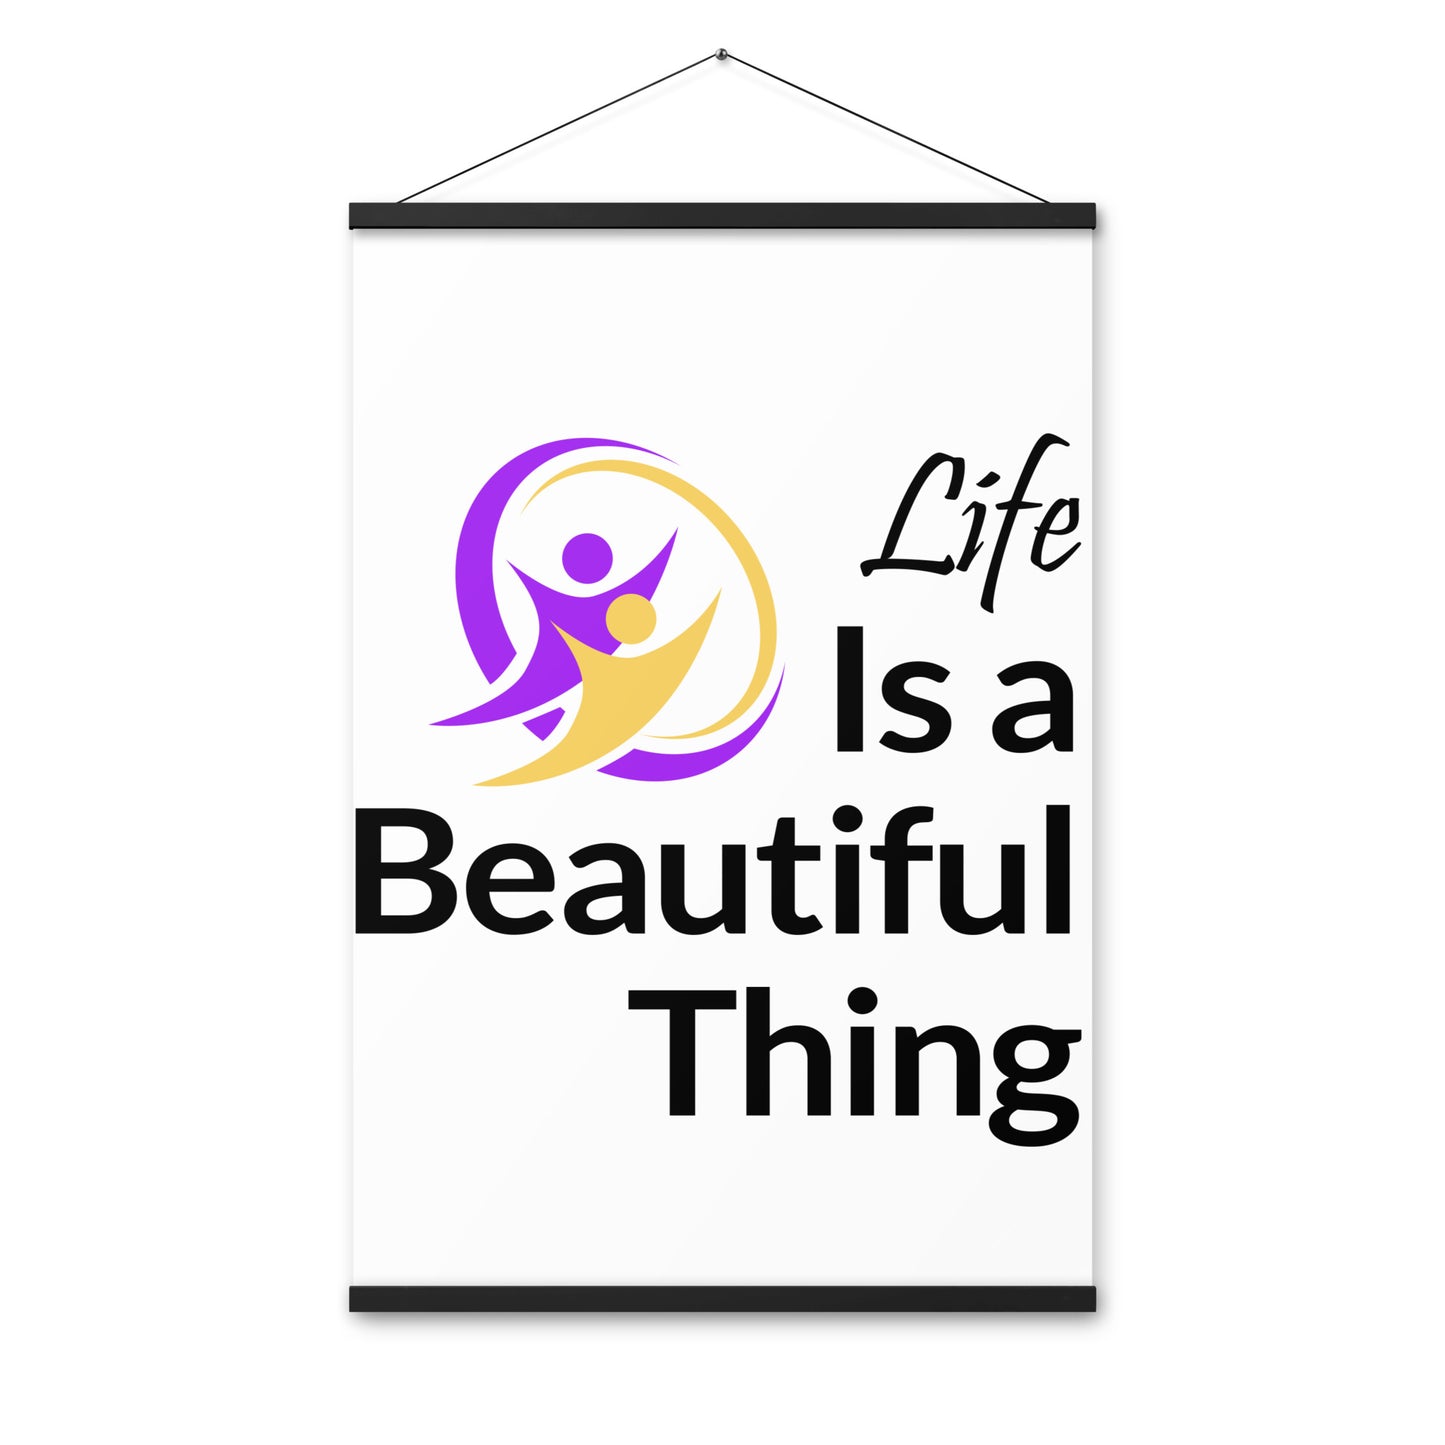 Beautiful Life Poster with hangers